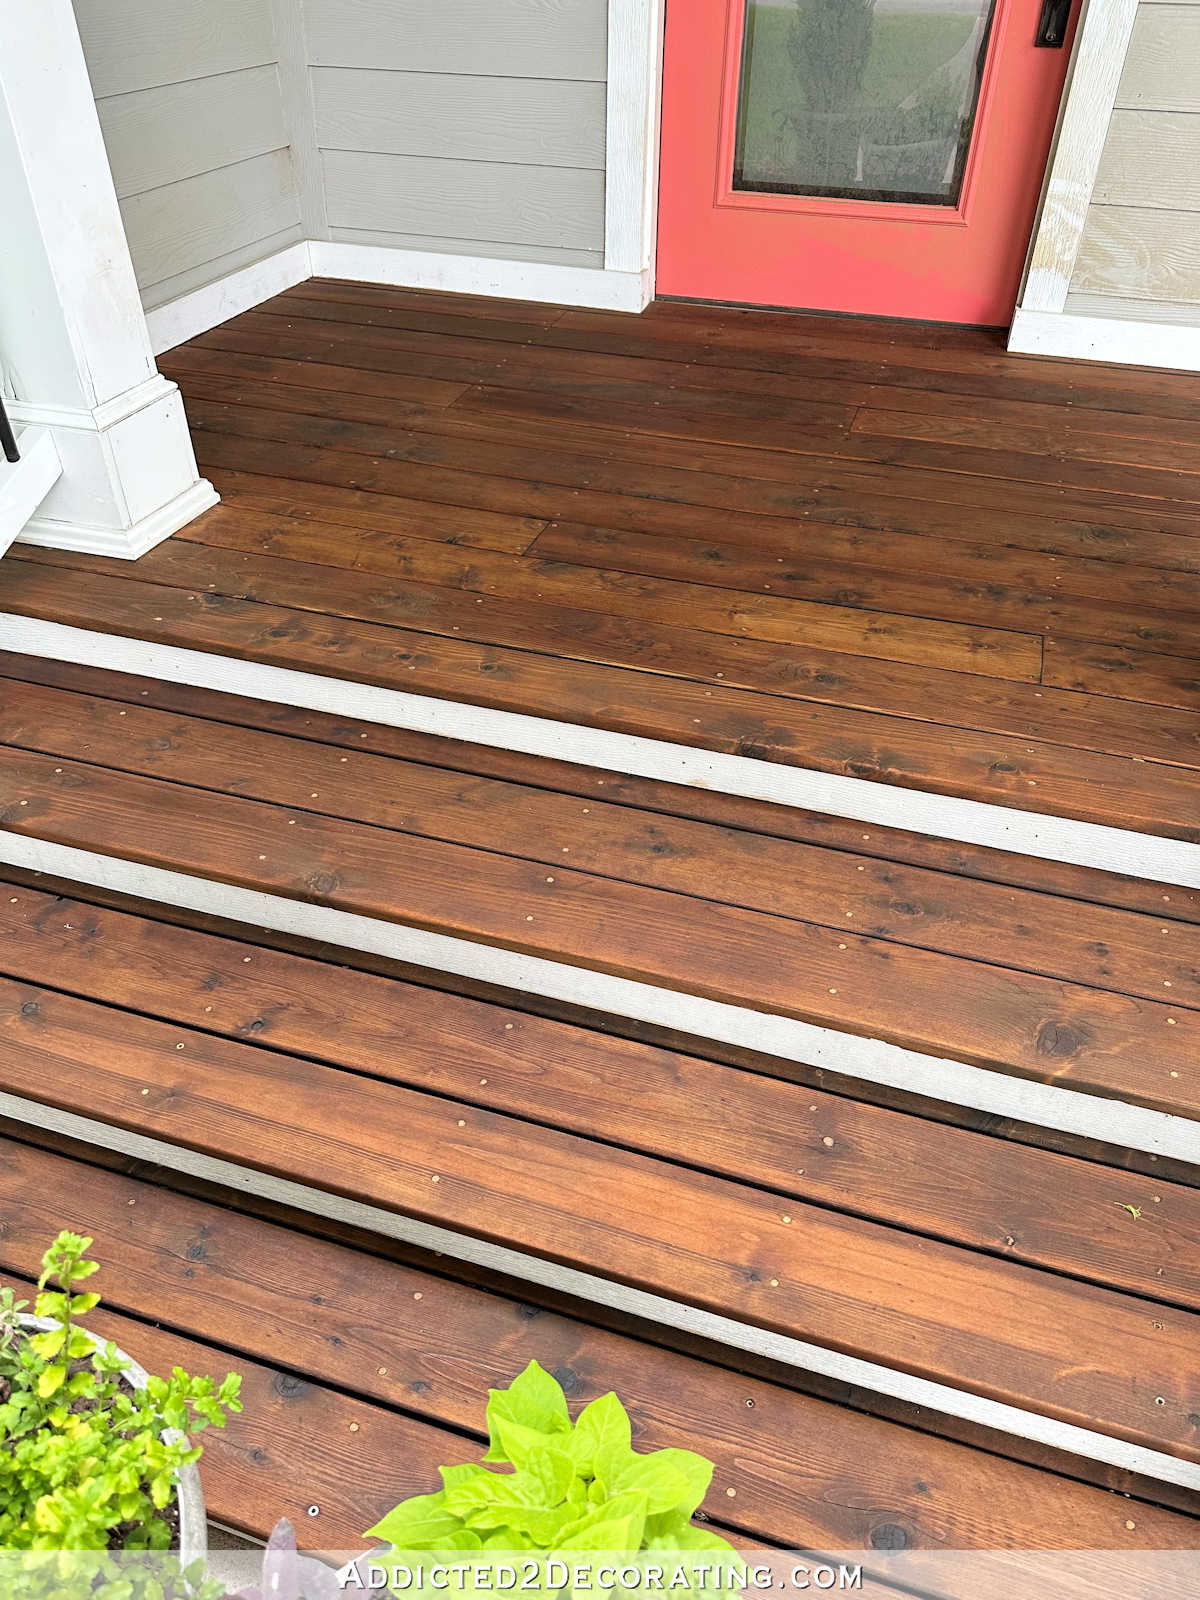 Cedar wood on the front porch was stained and sealed with Ready Seal in Dark Walnut